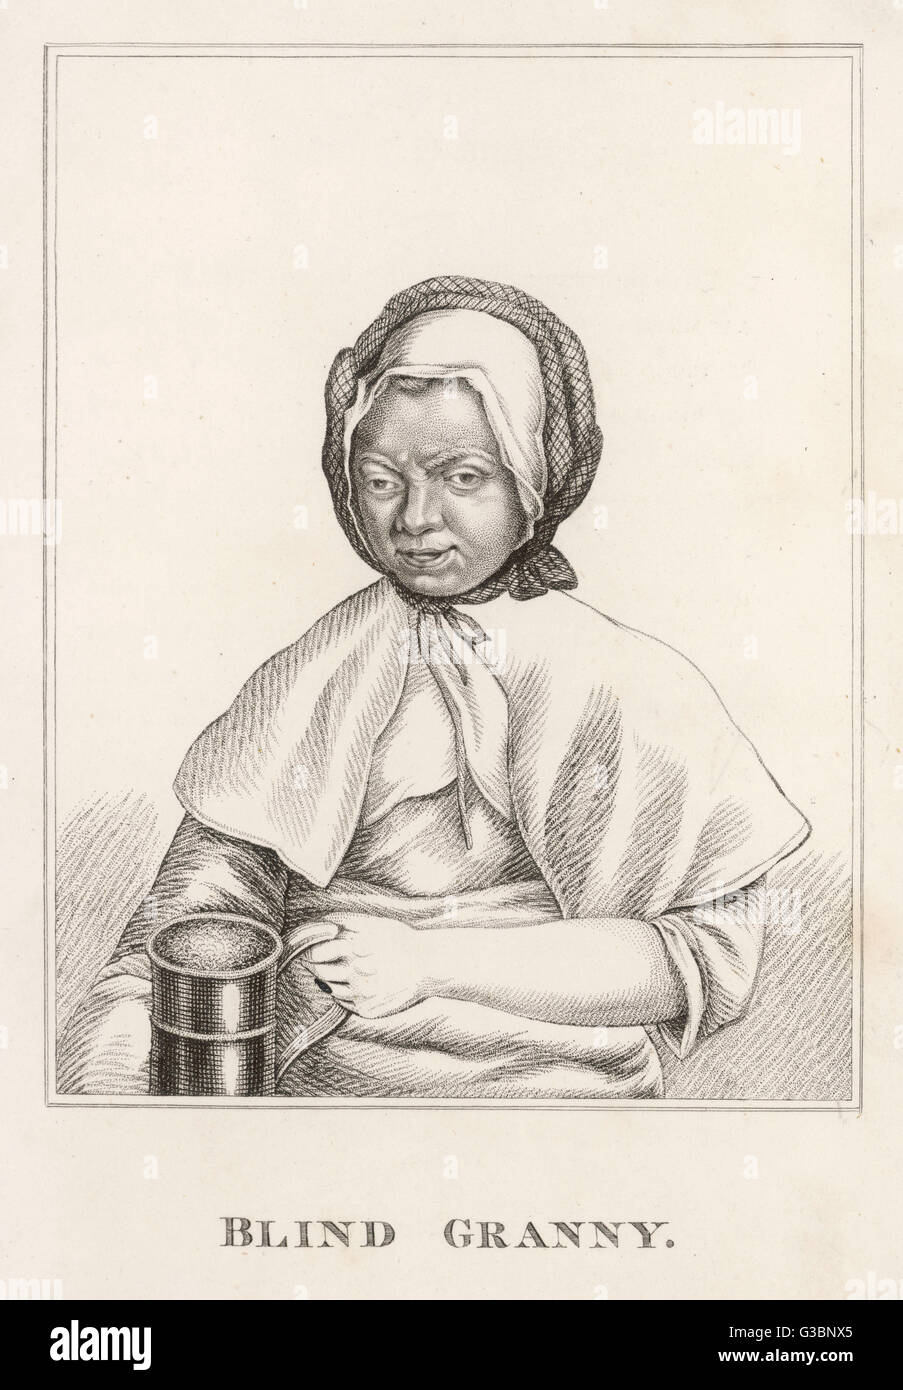 Blind Granny: a half blind,  drunken nuisance who would beg  by using her paricularly long  tongue to wash her blind eye  then spend the money on drink.  Poems were written about her!     Date: Early 18th century Stock Photo